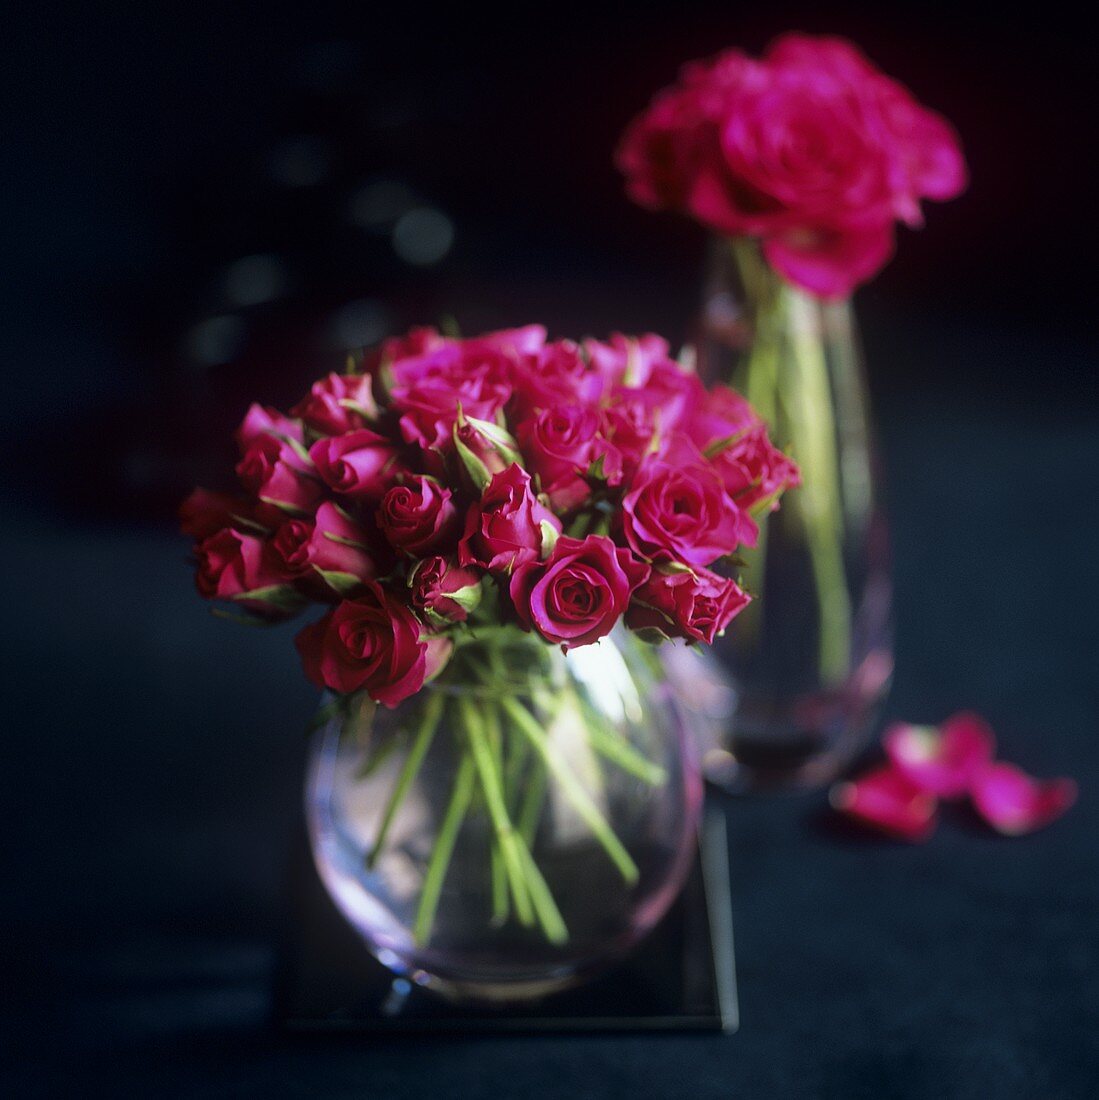 Red roses in two vases